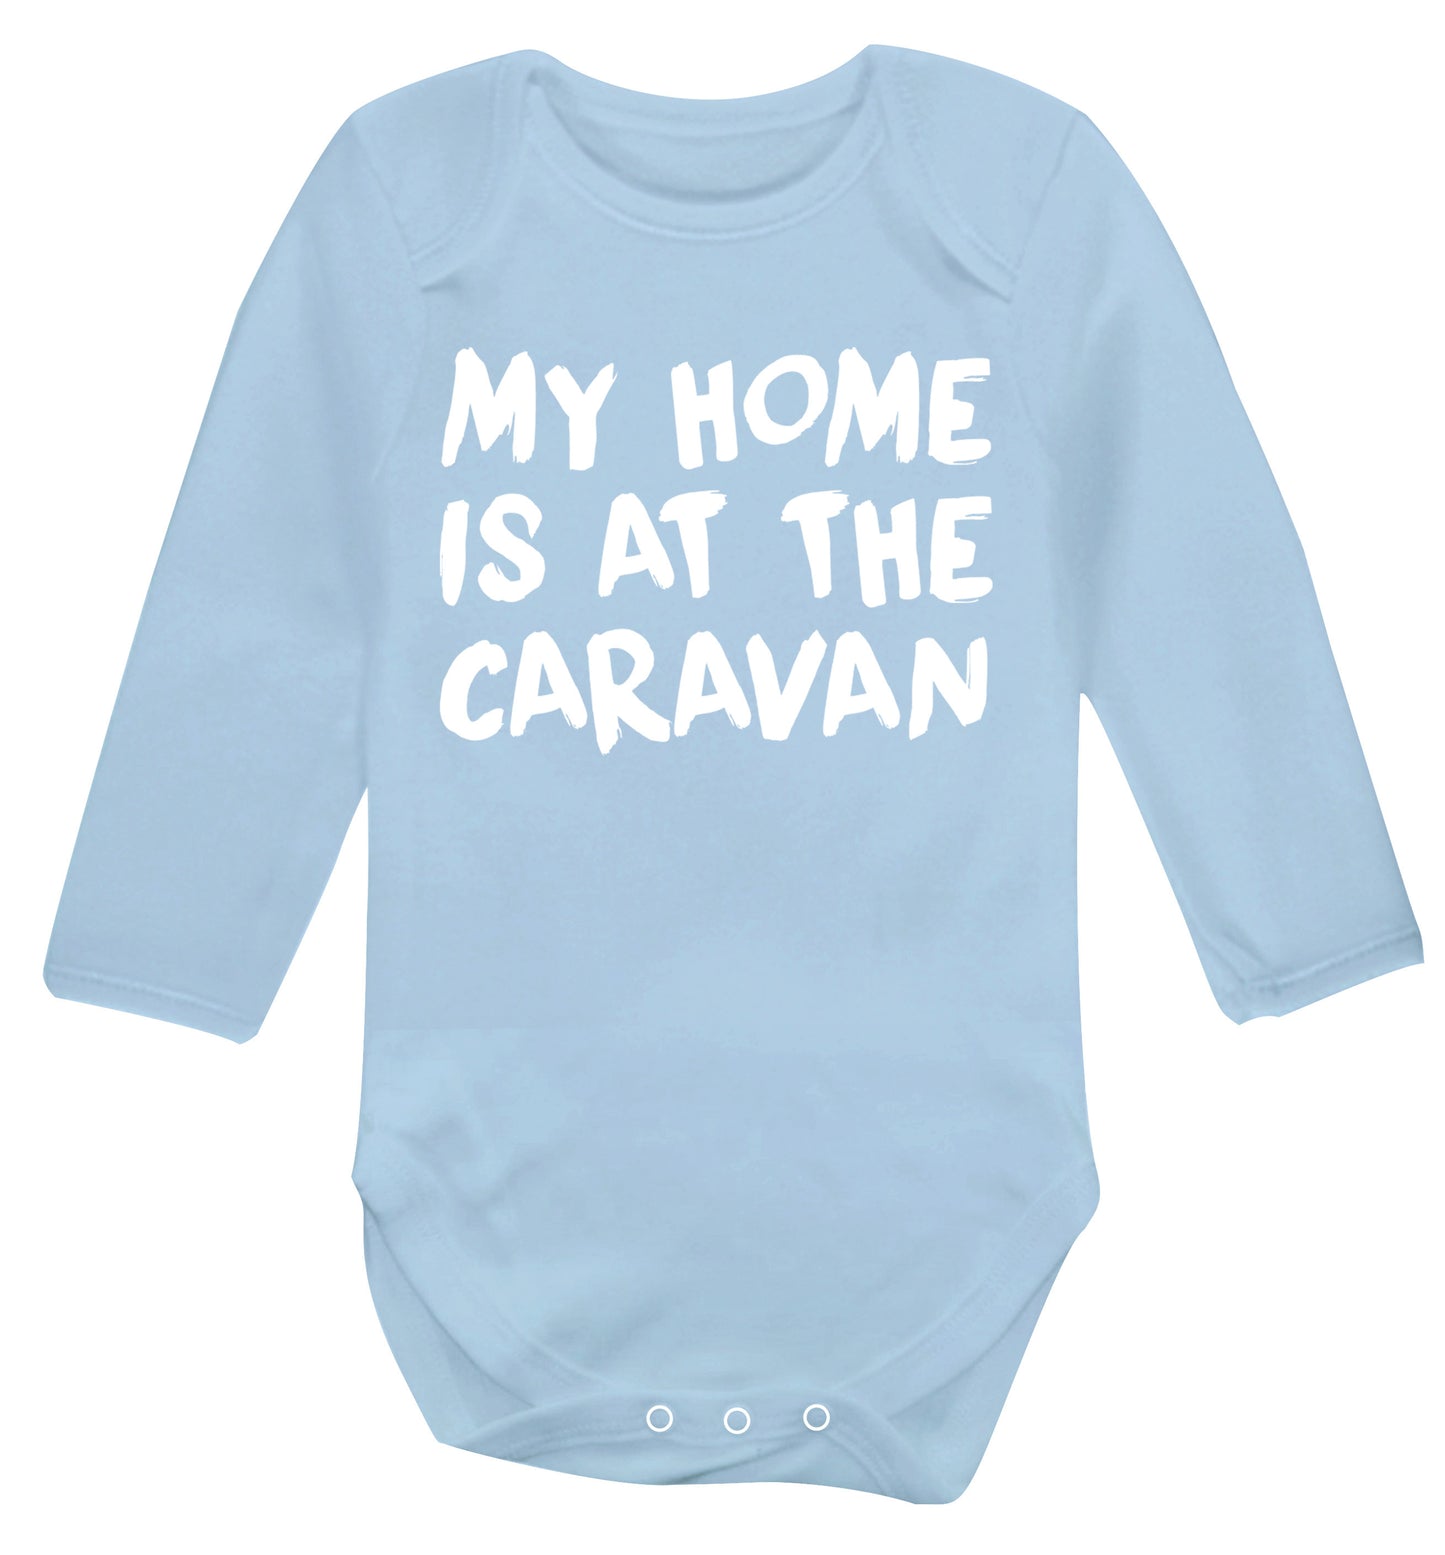 My home is at the caravan Baby Vest long sleeved pale blue 6-12 months